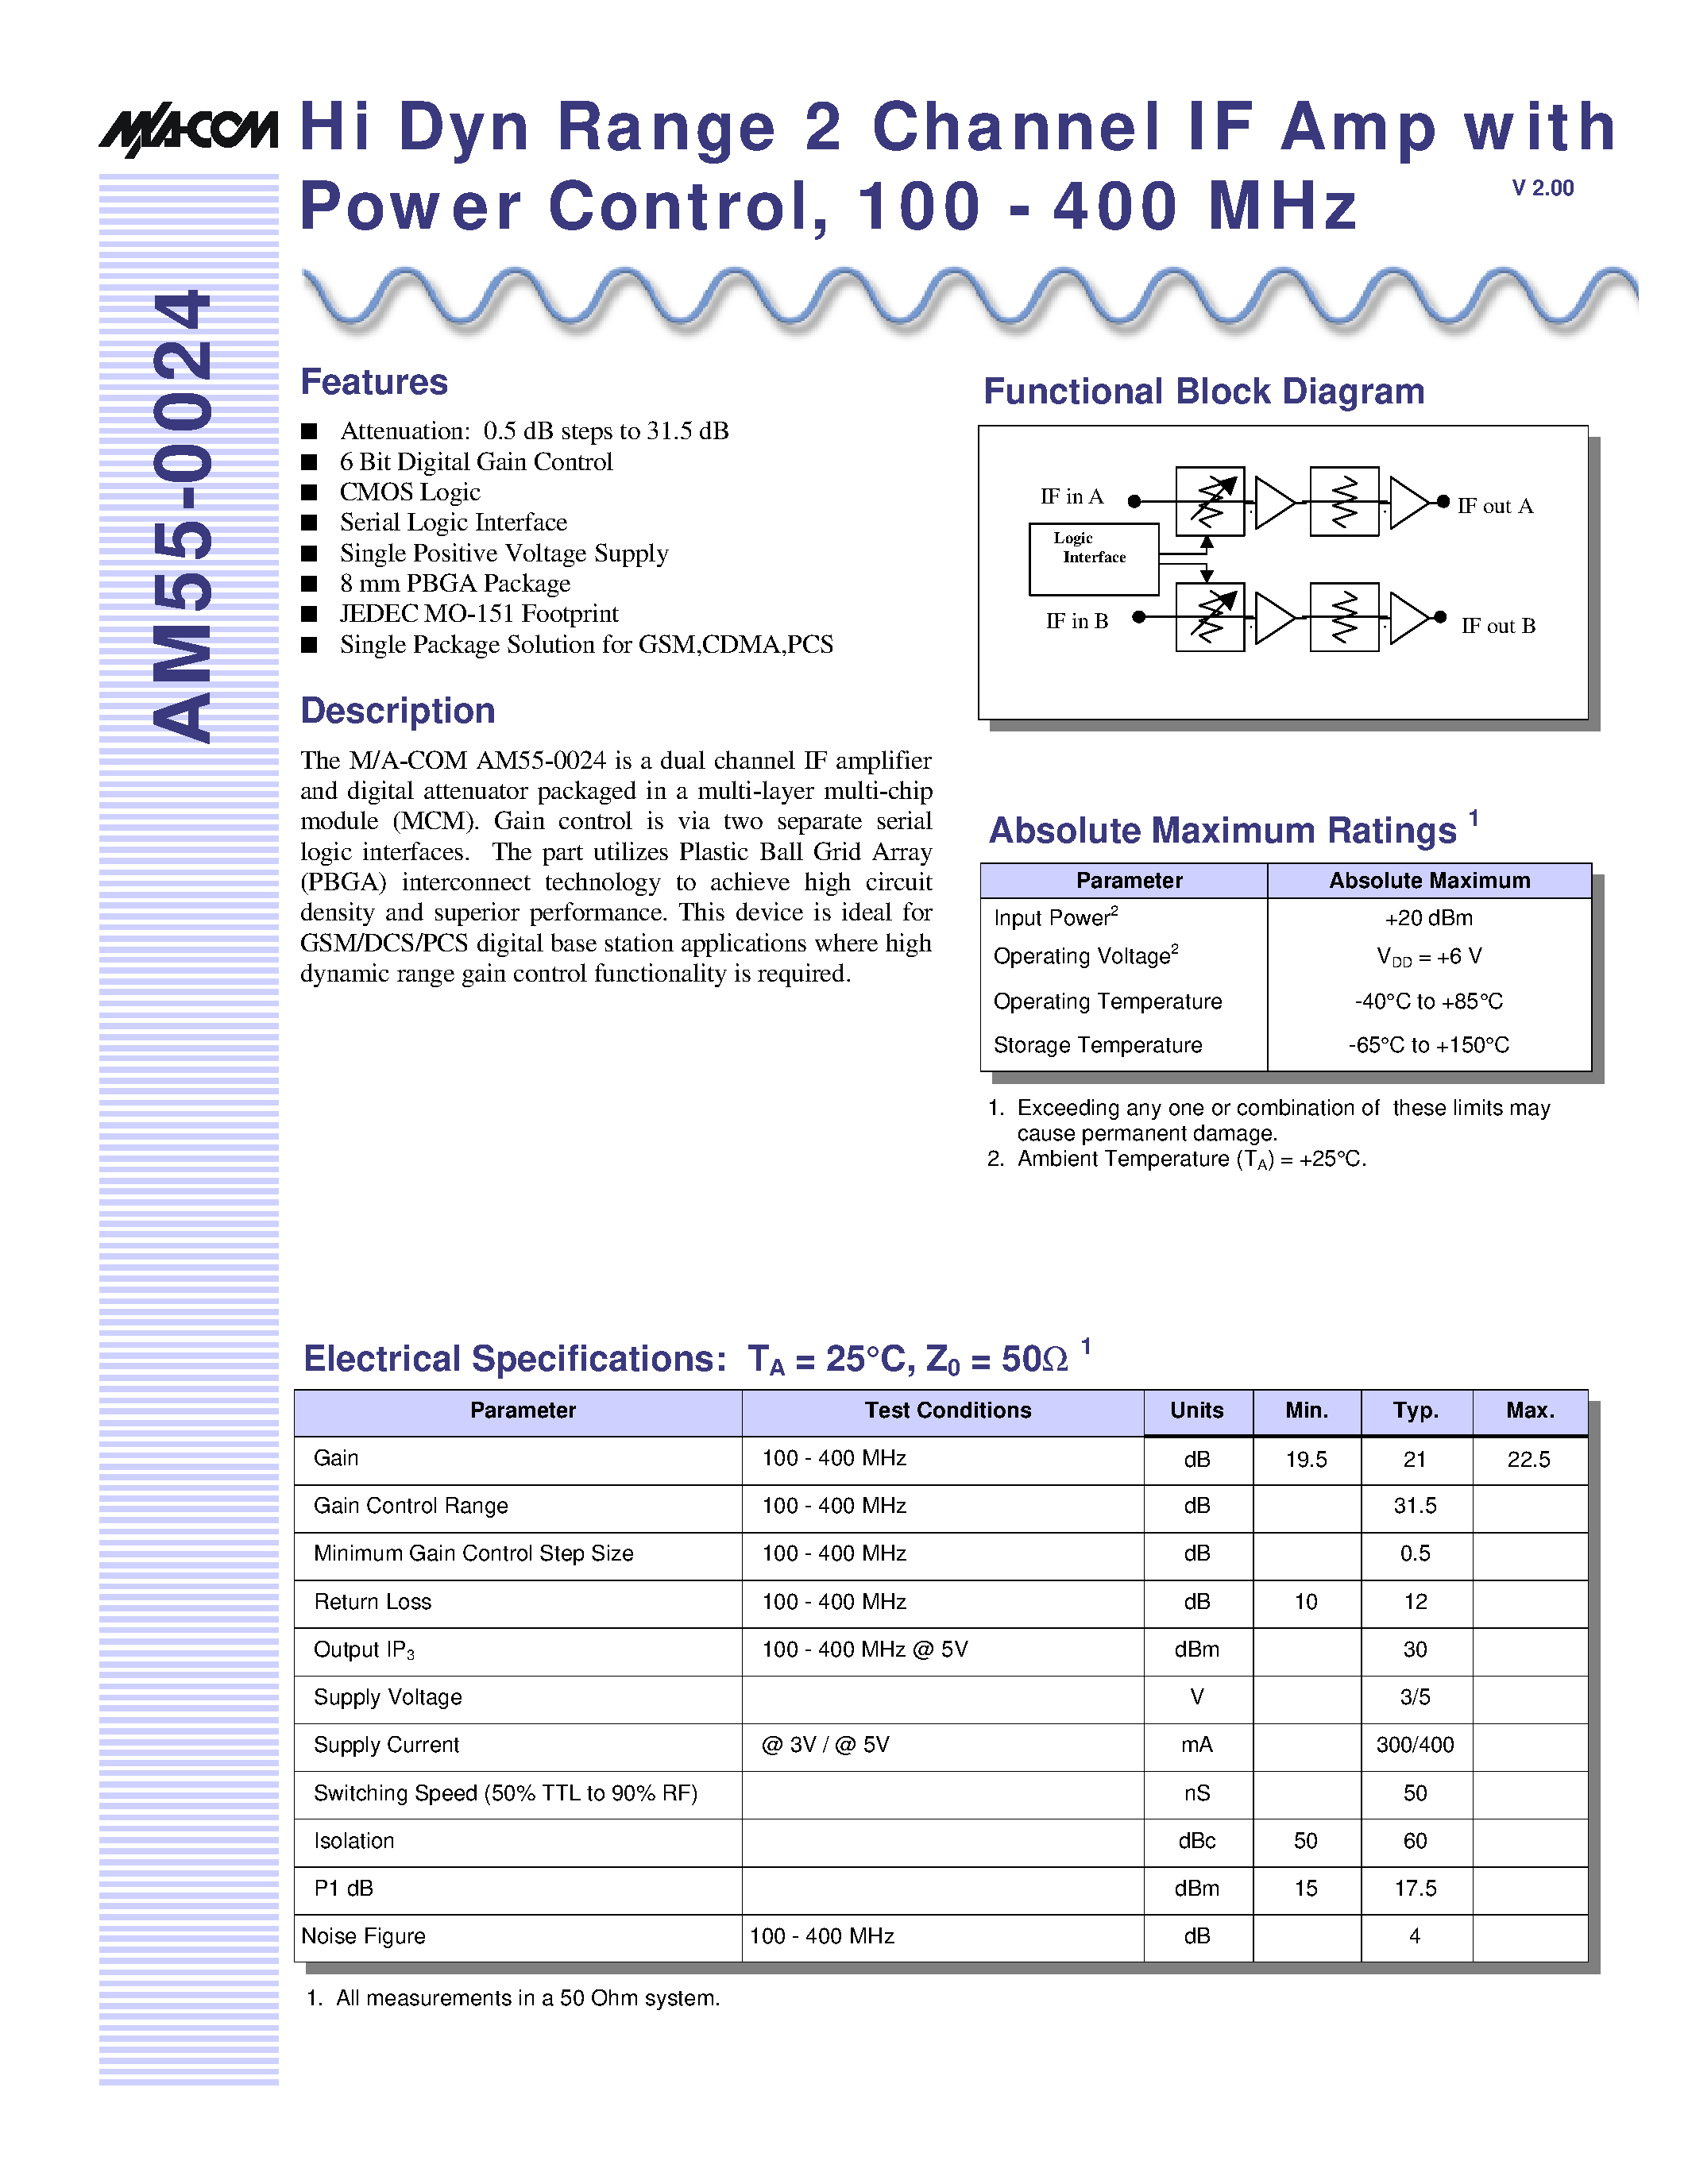 Datasheet AM55-0024RTR - Hi Dyn Range 2 Channel IF Amp with Power Control/ 100 - 400 MHz page 1